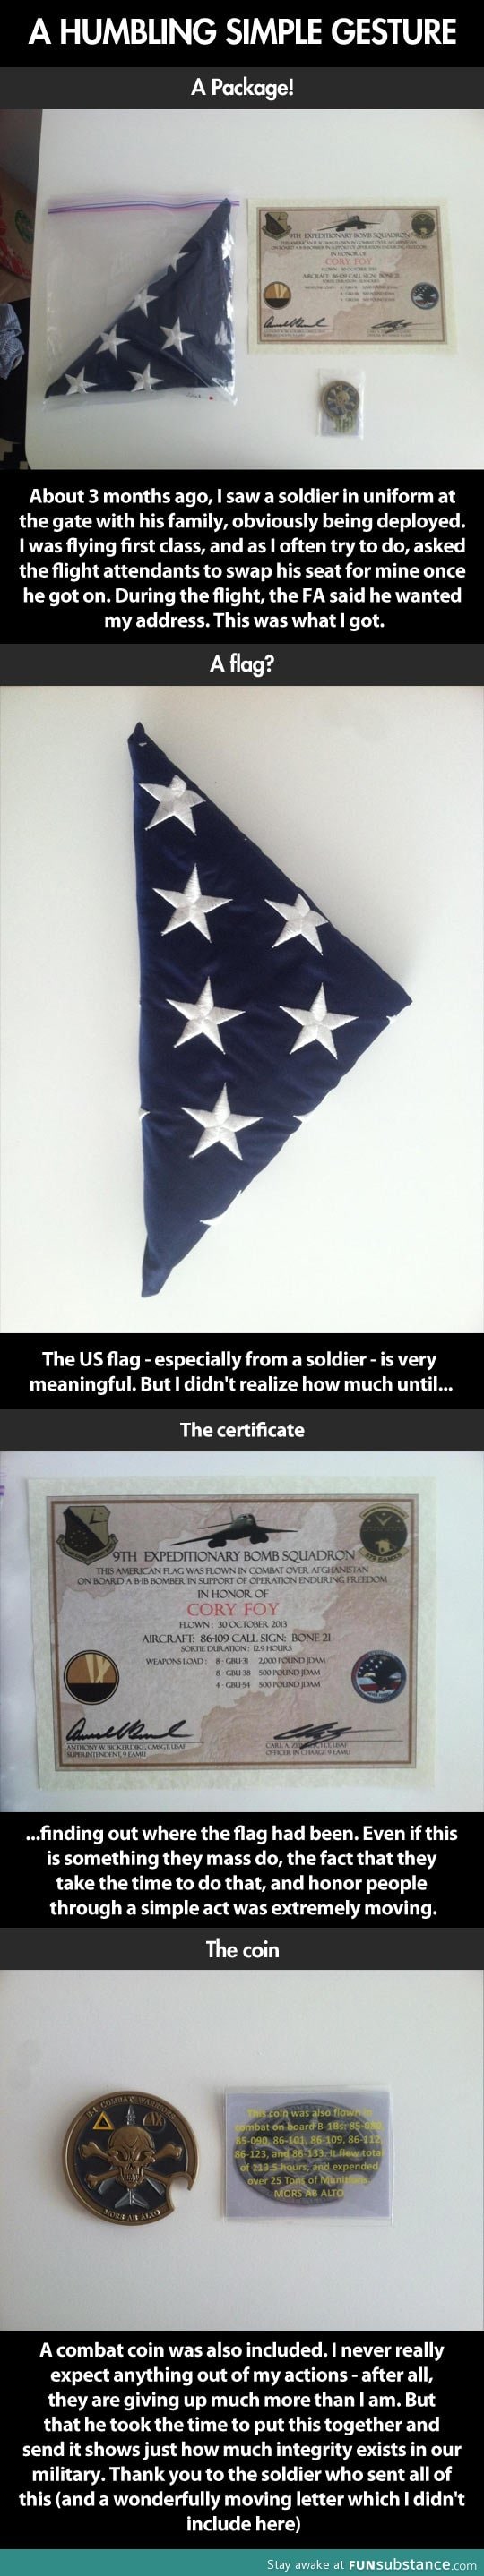 Amazing gift from a soldier